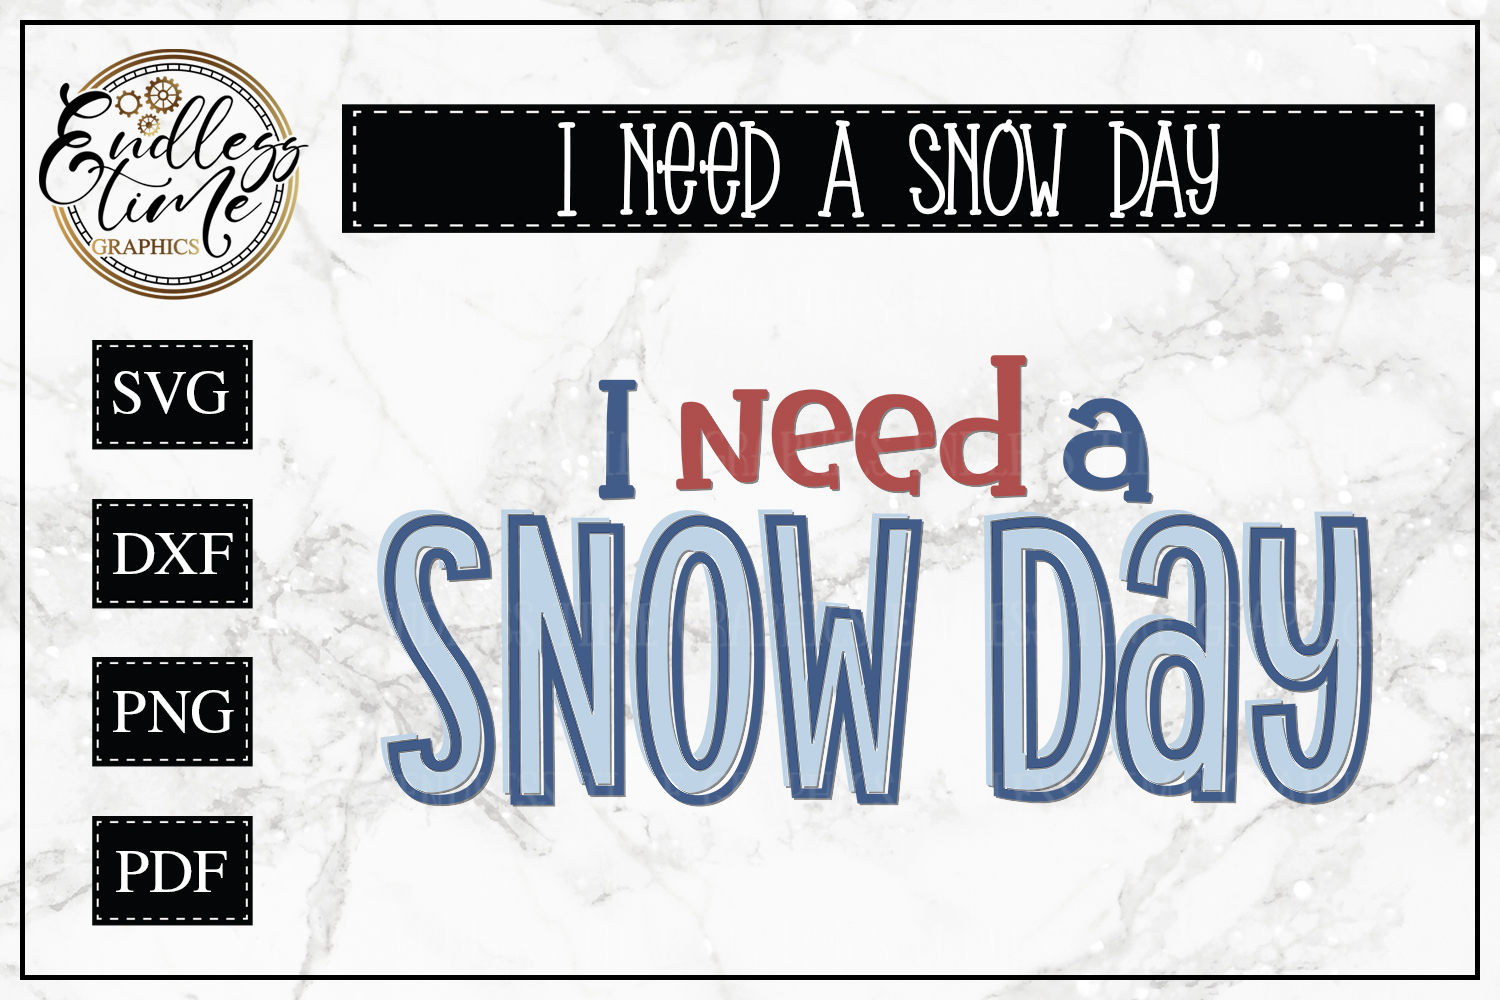 I need a Snow Day- A Funny Snow Day SVG for Teachers